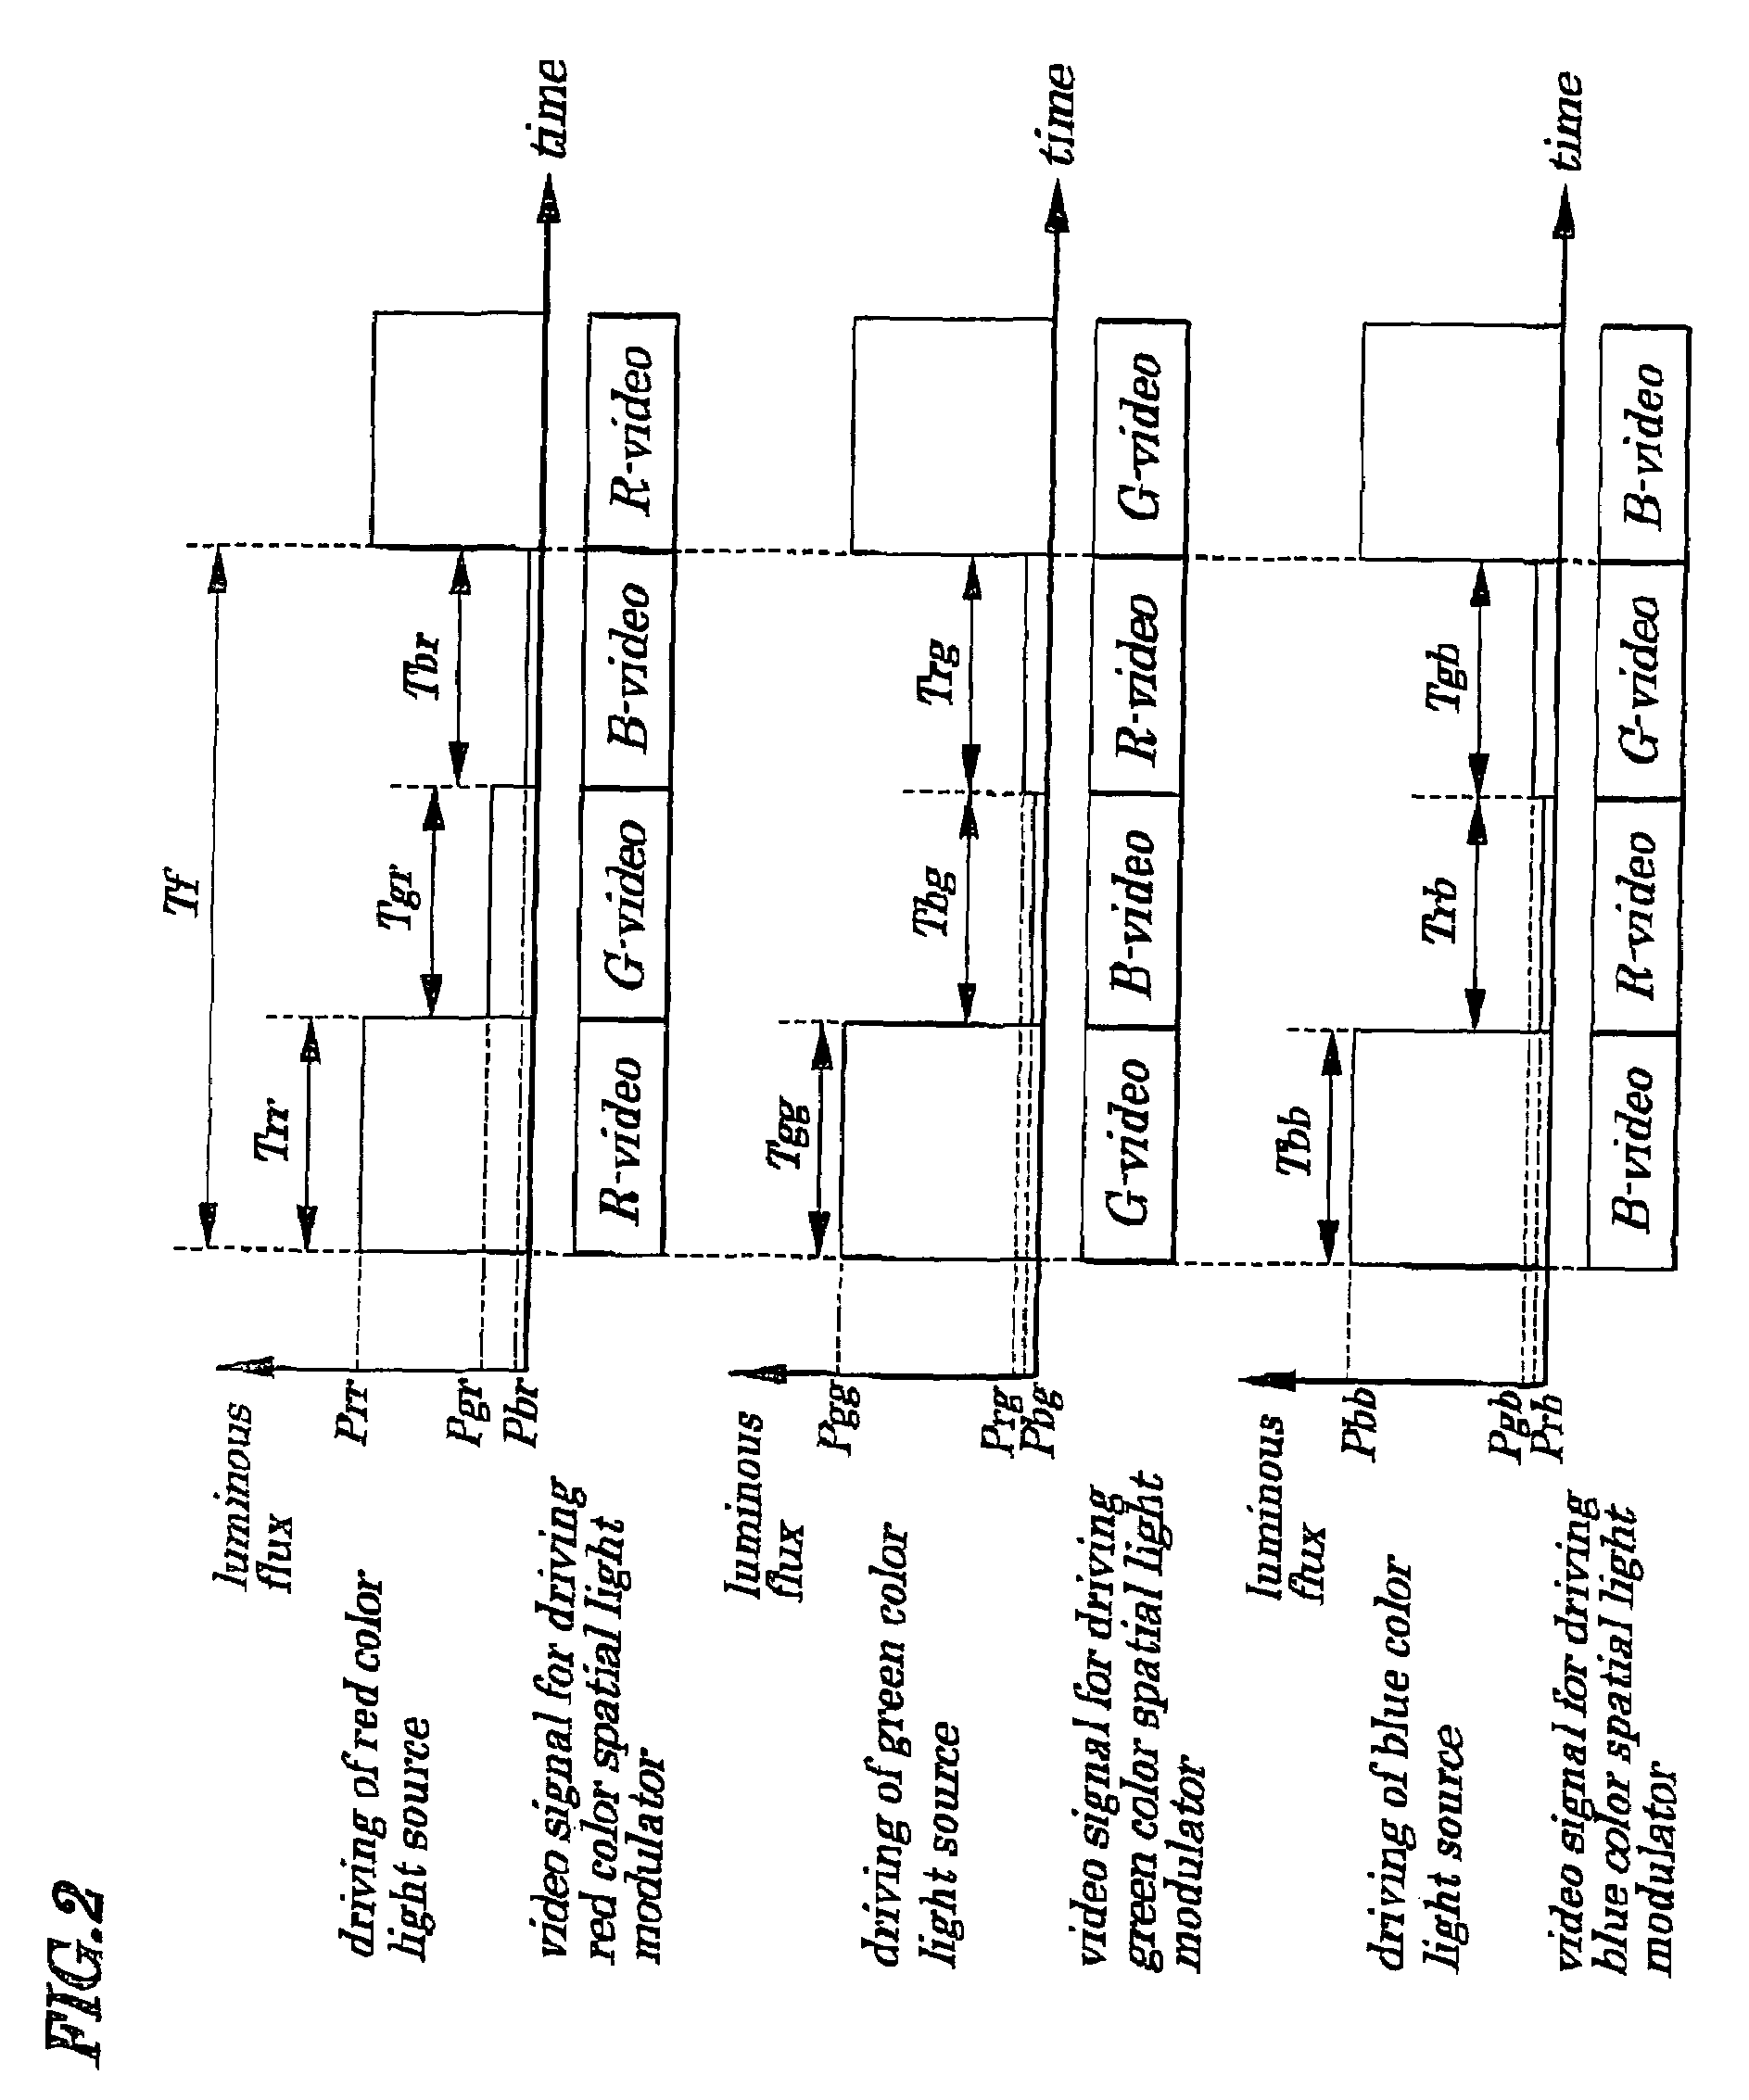 Video display device with spatial light modulator